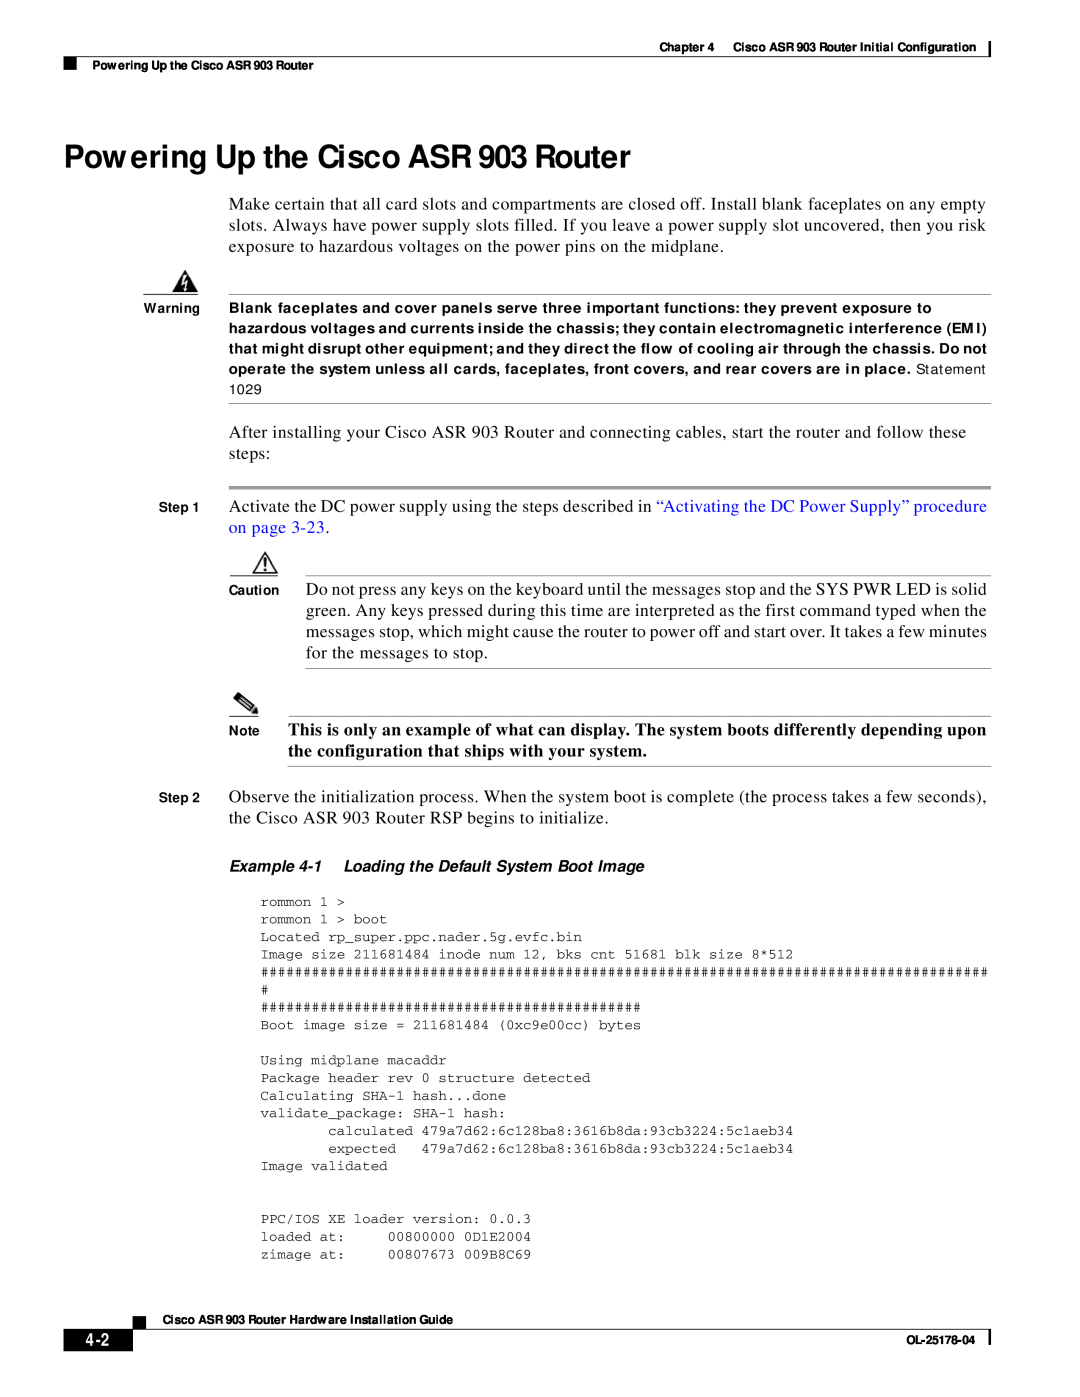 Cisco Systems manual Powering Up the Cisco ASR 903 Router, Example 4-1 Loading the Default System Boot Image 